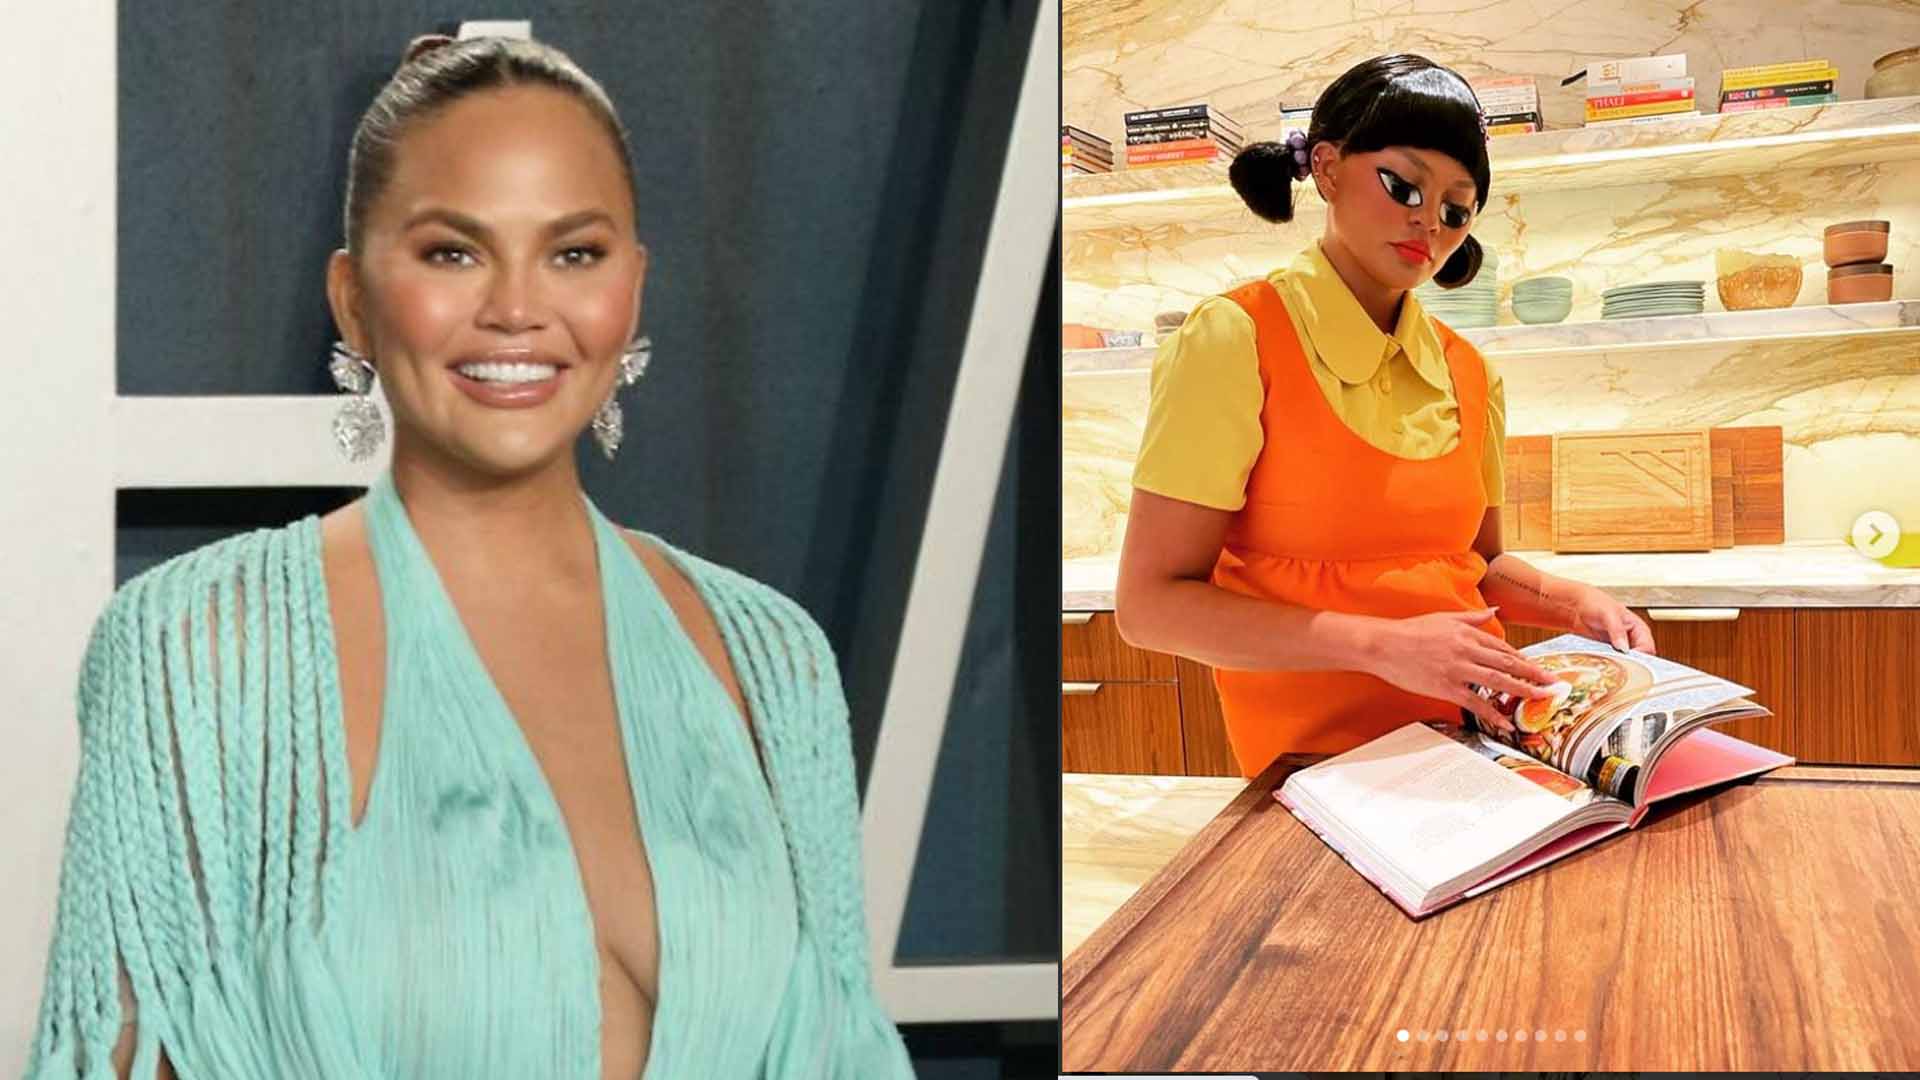 Chrissy Teigen’s Squid Game Party Draws Mixed Reactions; Some Say It’s “Tone-Deaf”, Others Think “It’s So Much Fun”